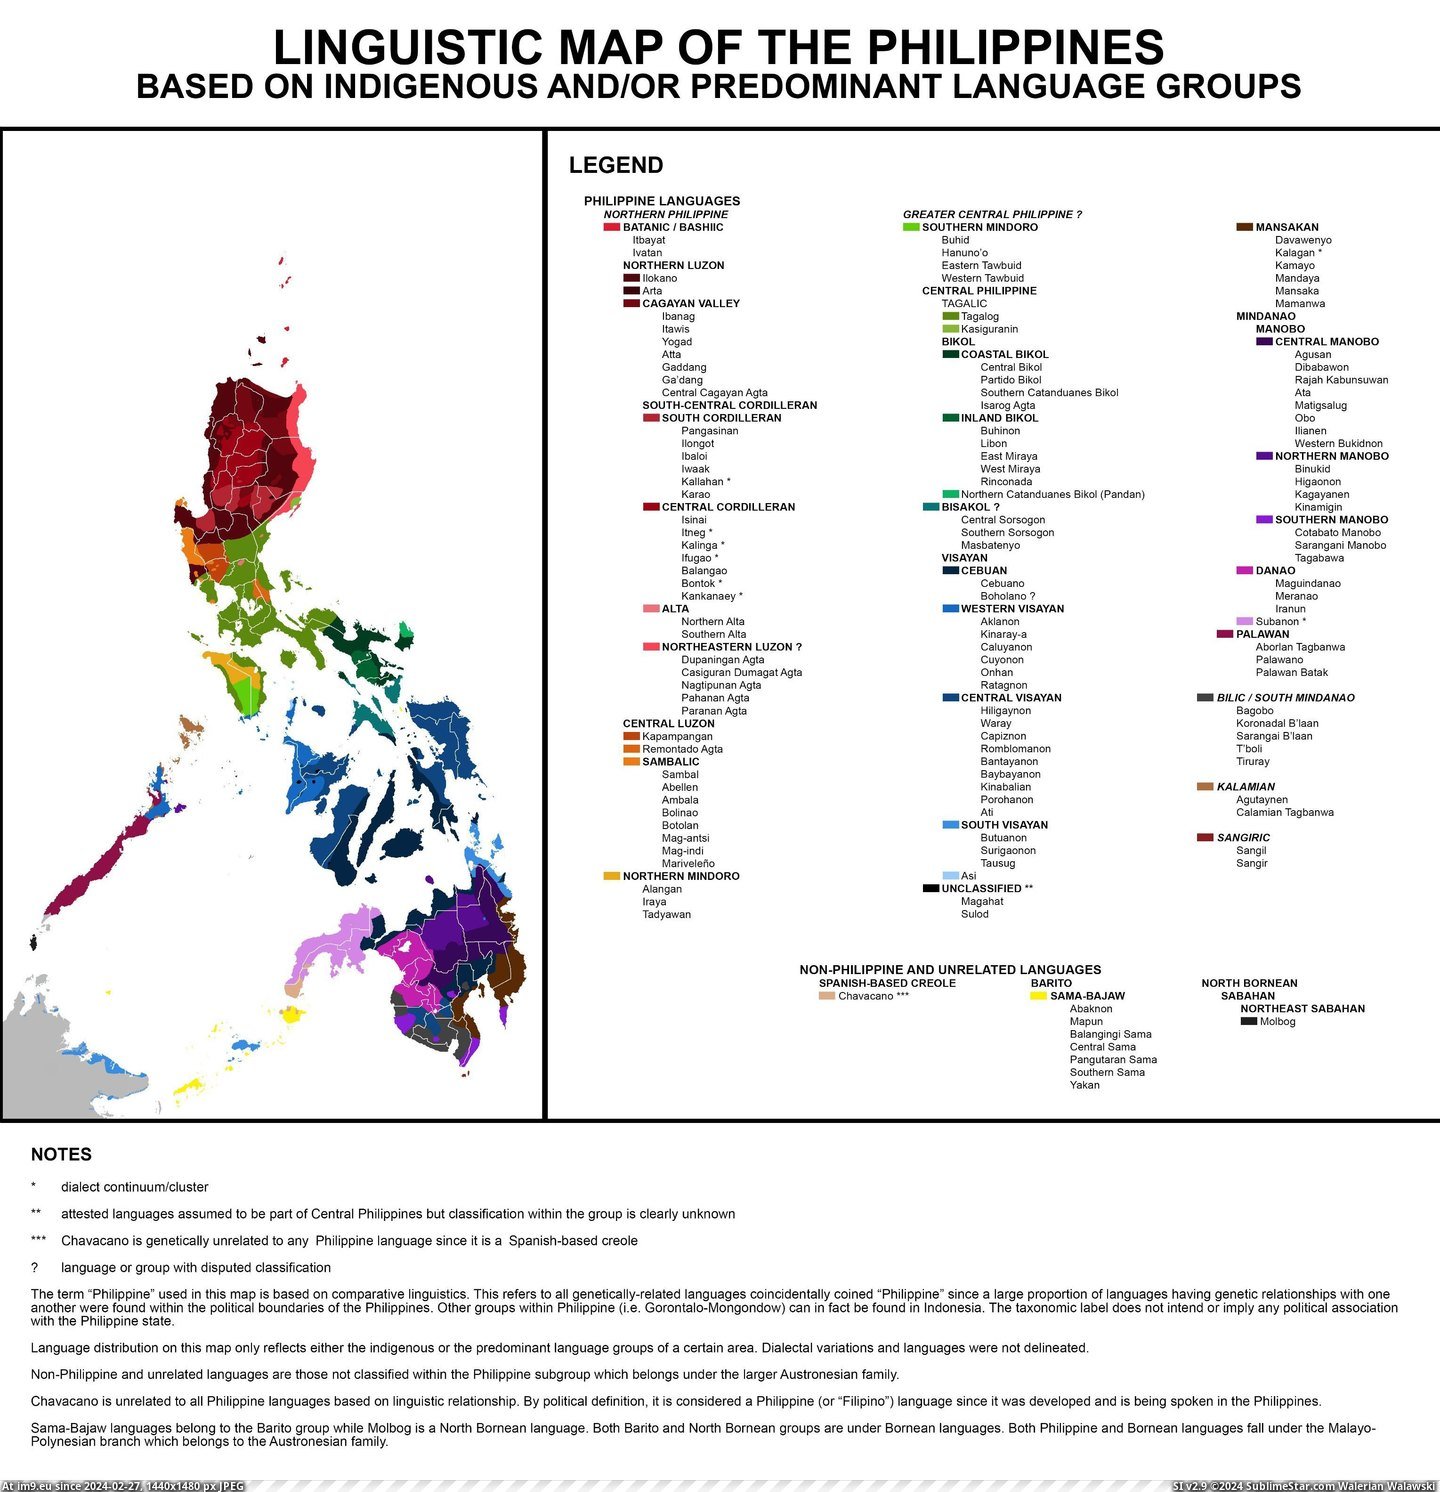 #Map #Language #Groups #Linguistic #Indigenous #Based #Philippines [Mapporn] Linguistic map of the Philippines based on indigenous and-or predominant language groups [3058x3154] (Philippines) Pic. (Изображение из альбом My r/MAPS favs))